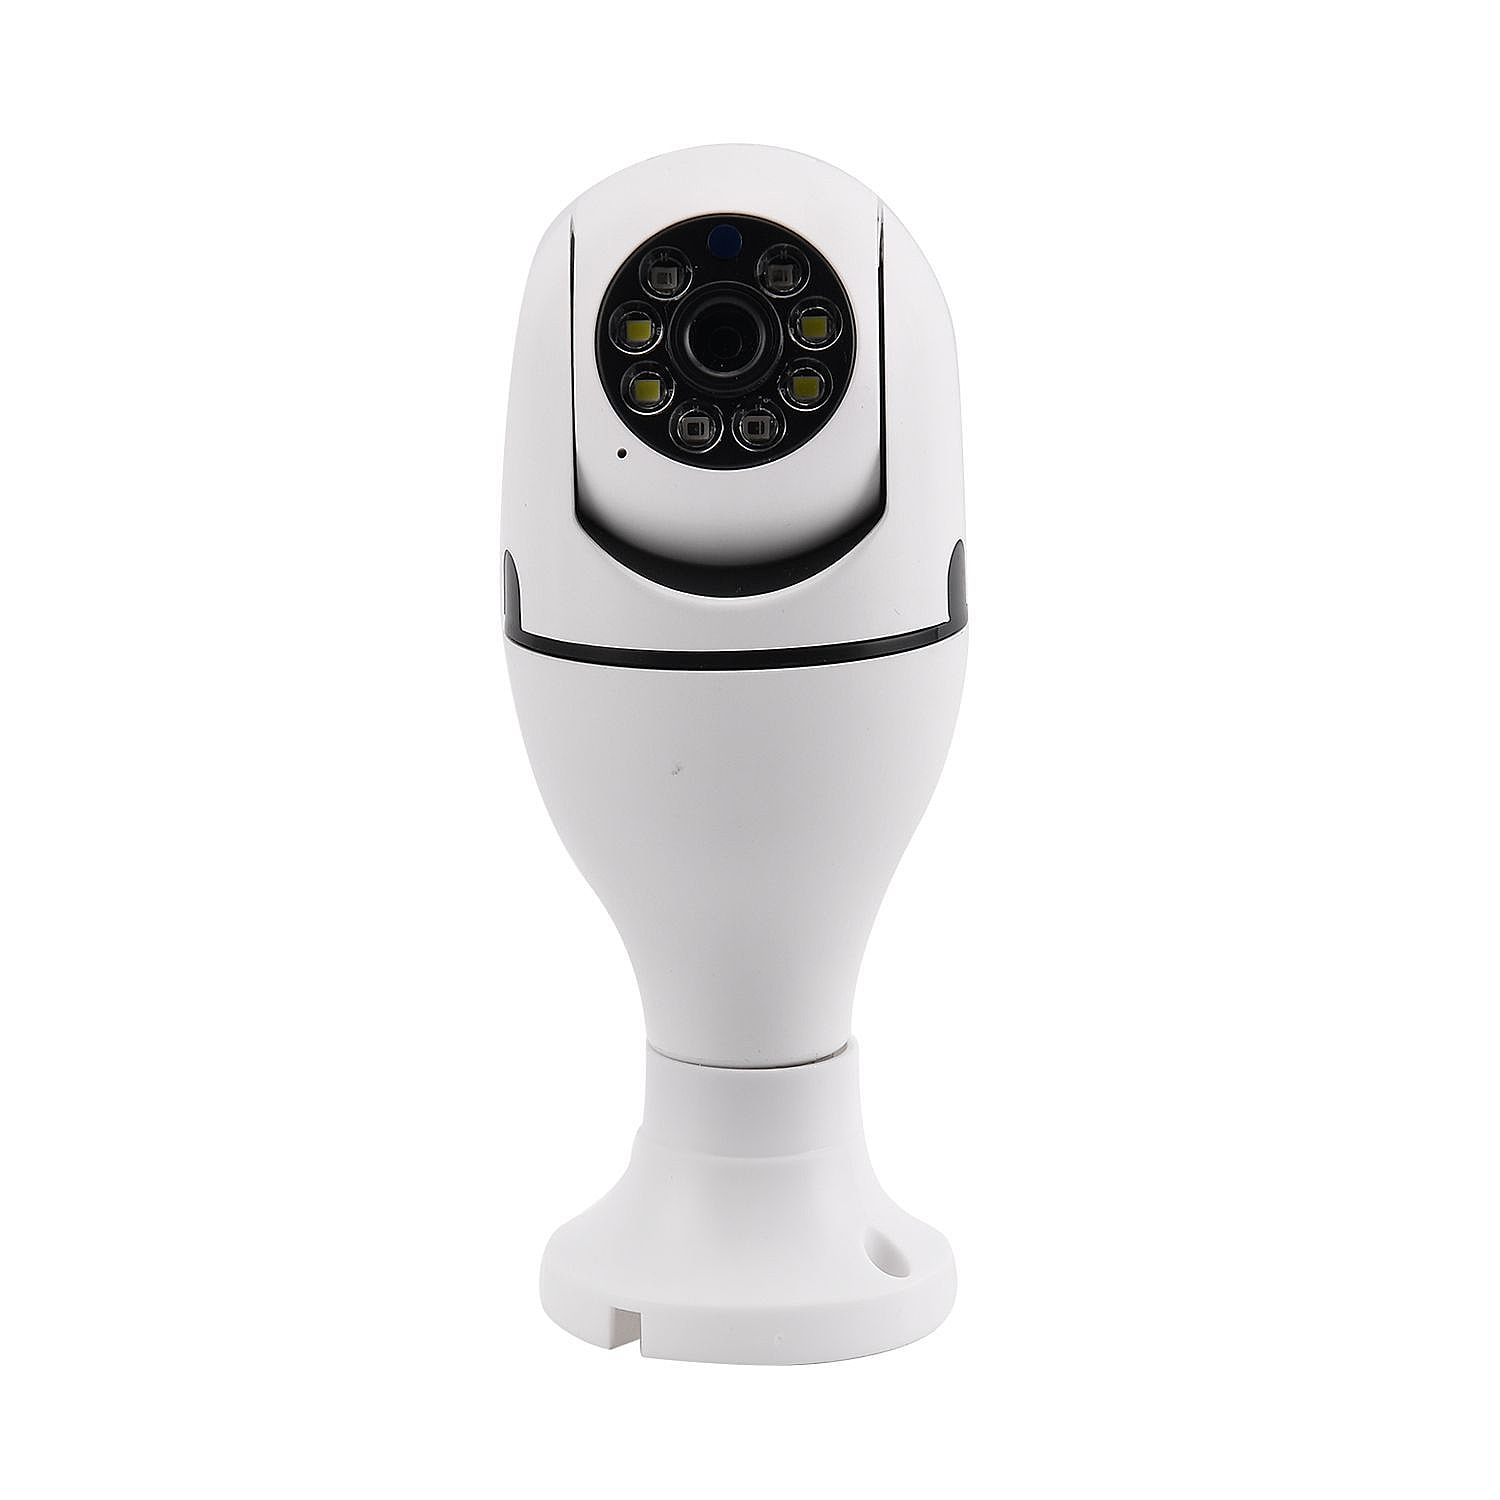 Light-Bulb-Security-Camera-with-Clear-Night-Vision-Full-HD-365-Degree-